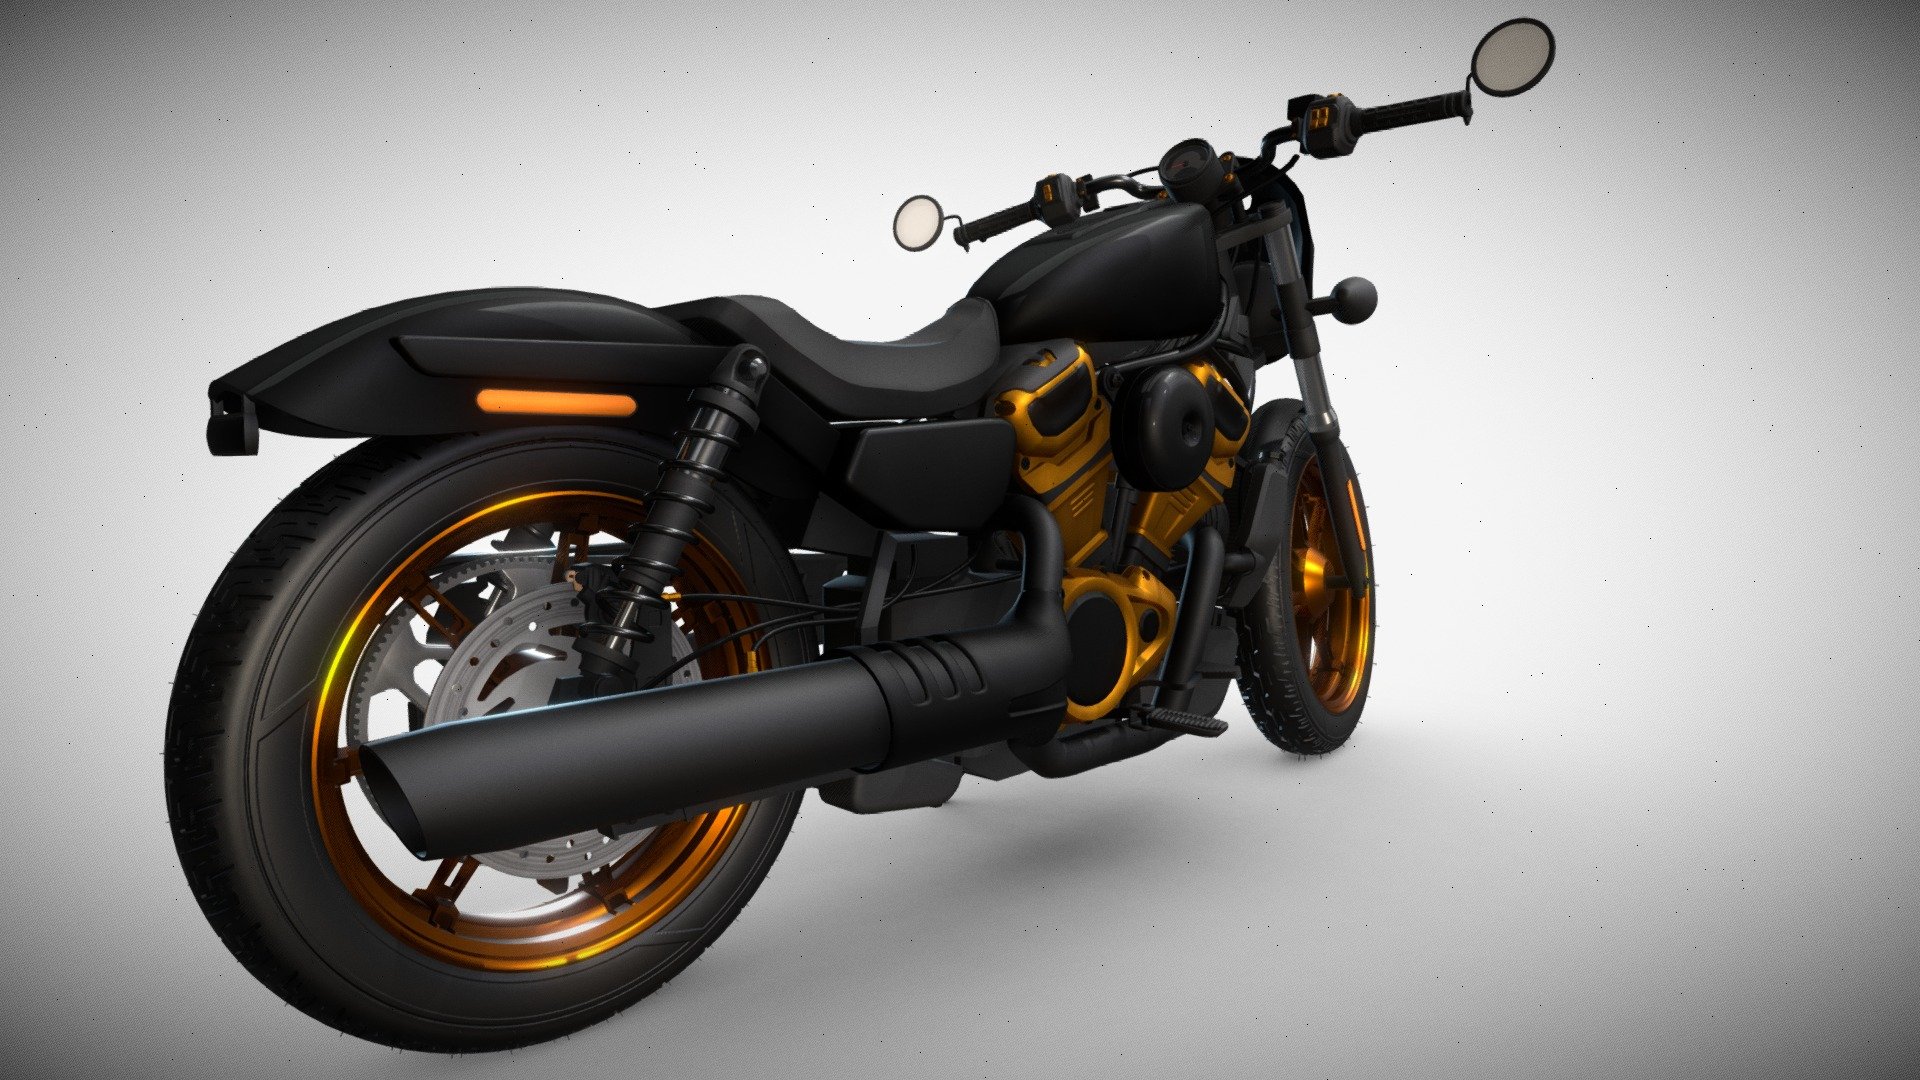 This is the new Harley-Davidson Nightster 2022 modeled in Blender. For better quality renders, and more color schemes, view it on ArtStation
https://www.artstation.com/artwork/lRoV45 - Harley-Davidson Nightster 2022 Motorcycle - Buy Royalty Free 3D model by Bryan T (@BT73) 3d model